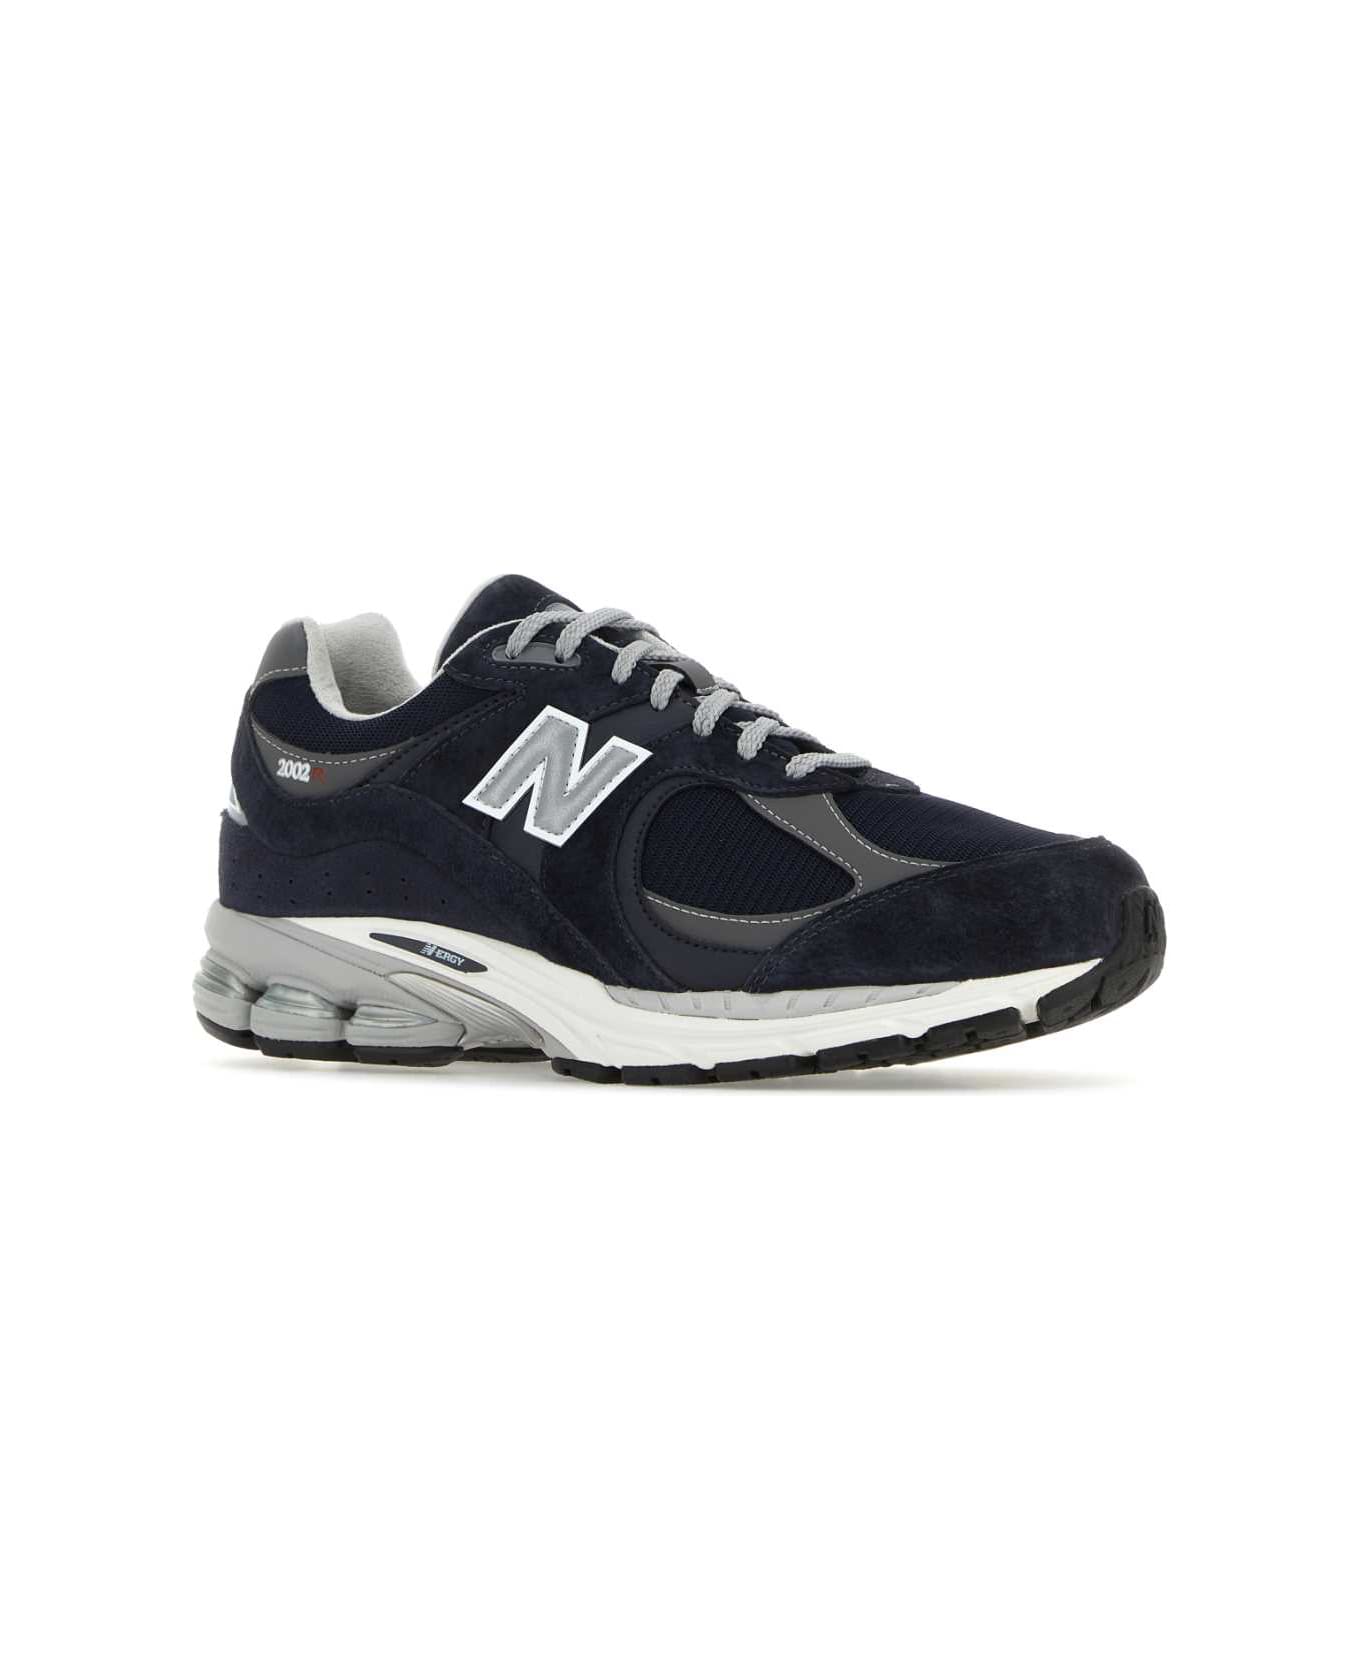 New Balance Multicolor Suede And Mesh 2002r Sneakers - ECLIPSE